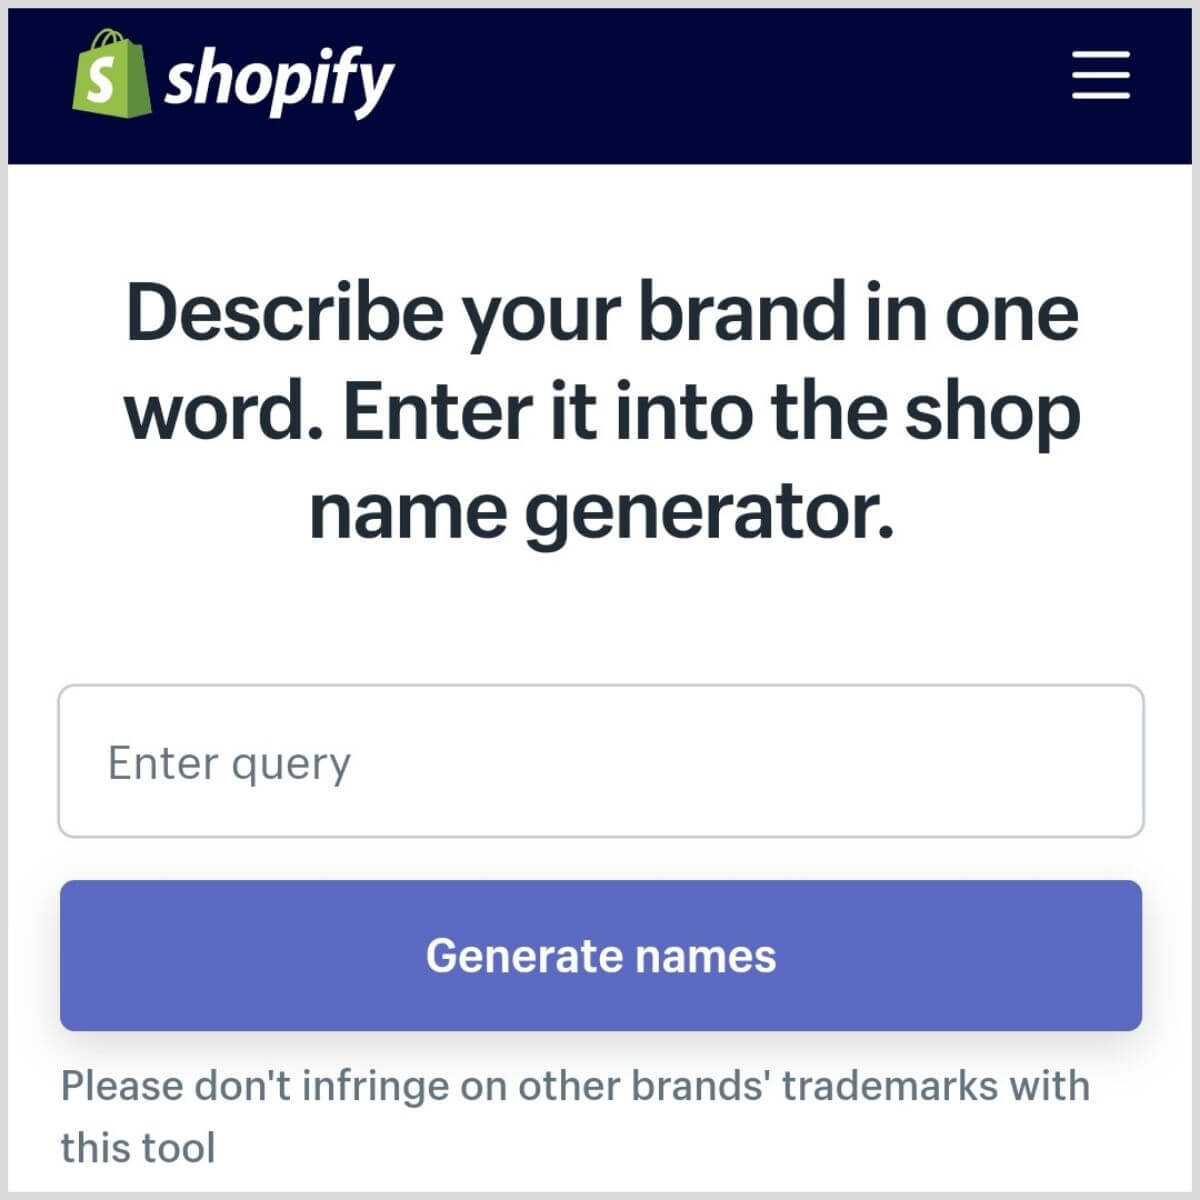 Shopify business name generator